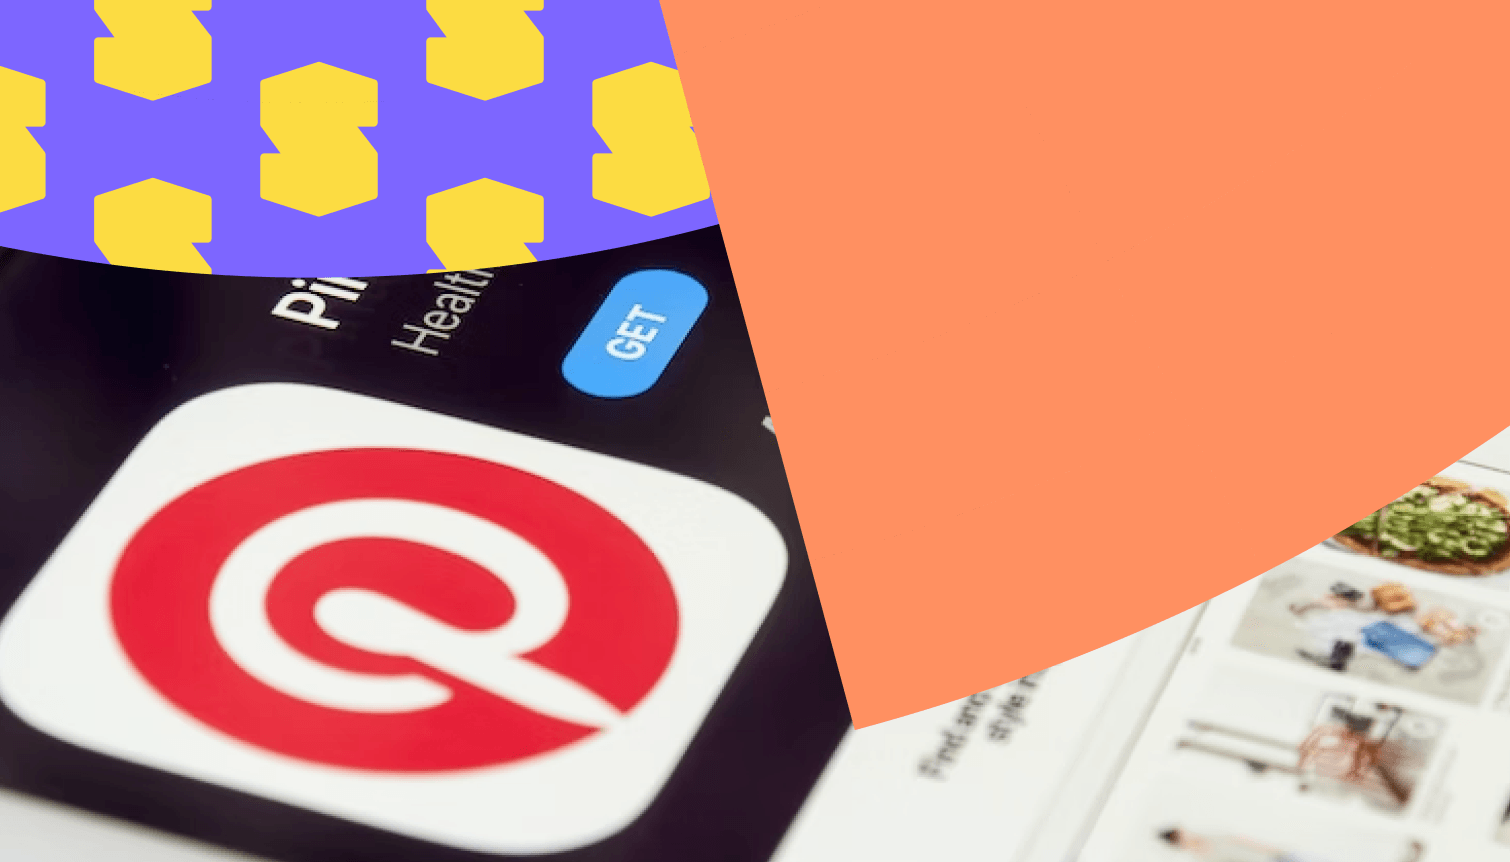 How to Use a Business Pinterest Account: The Ultimate Guide